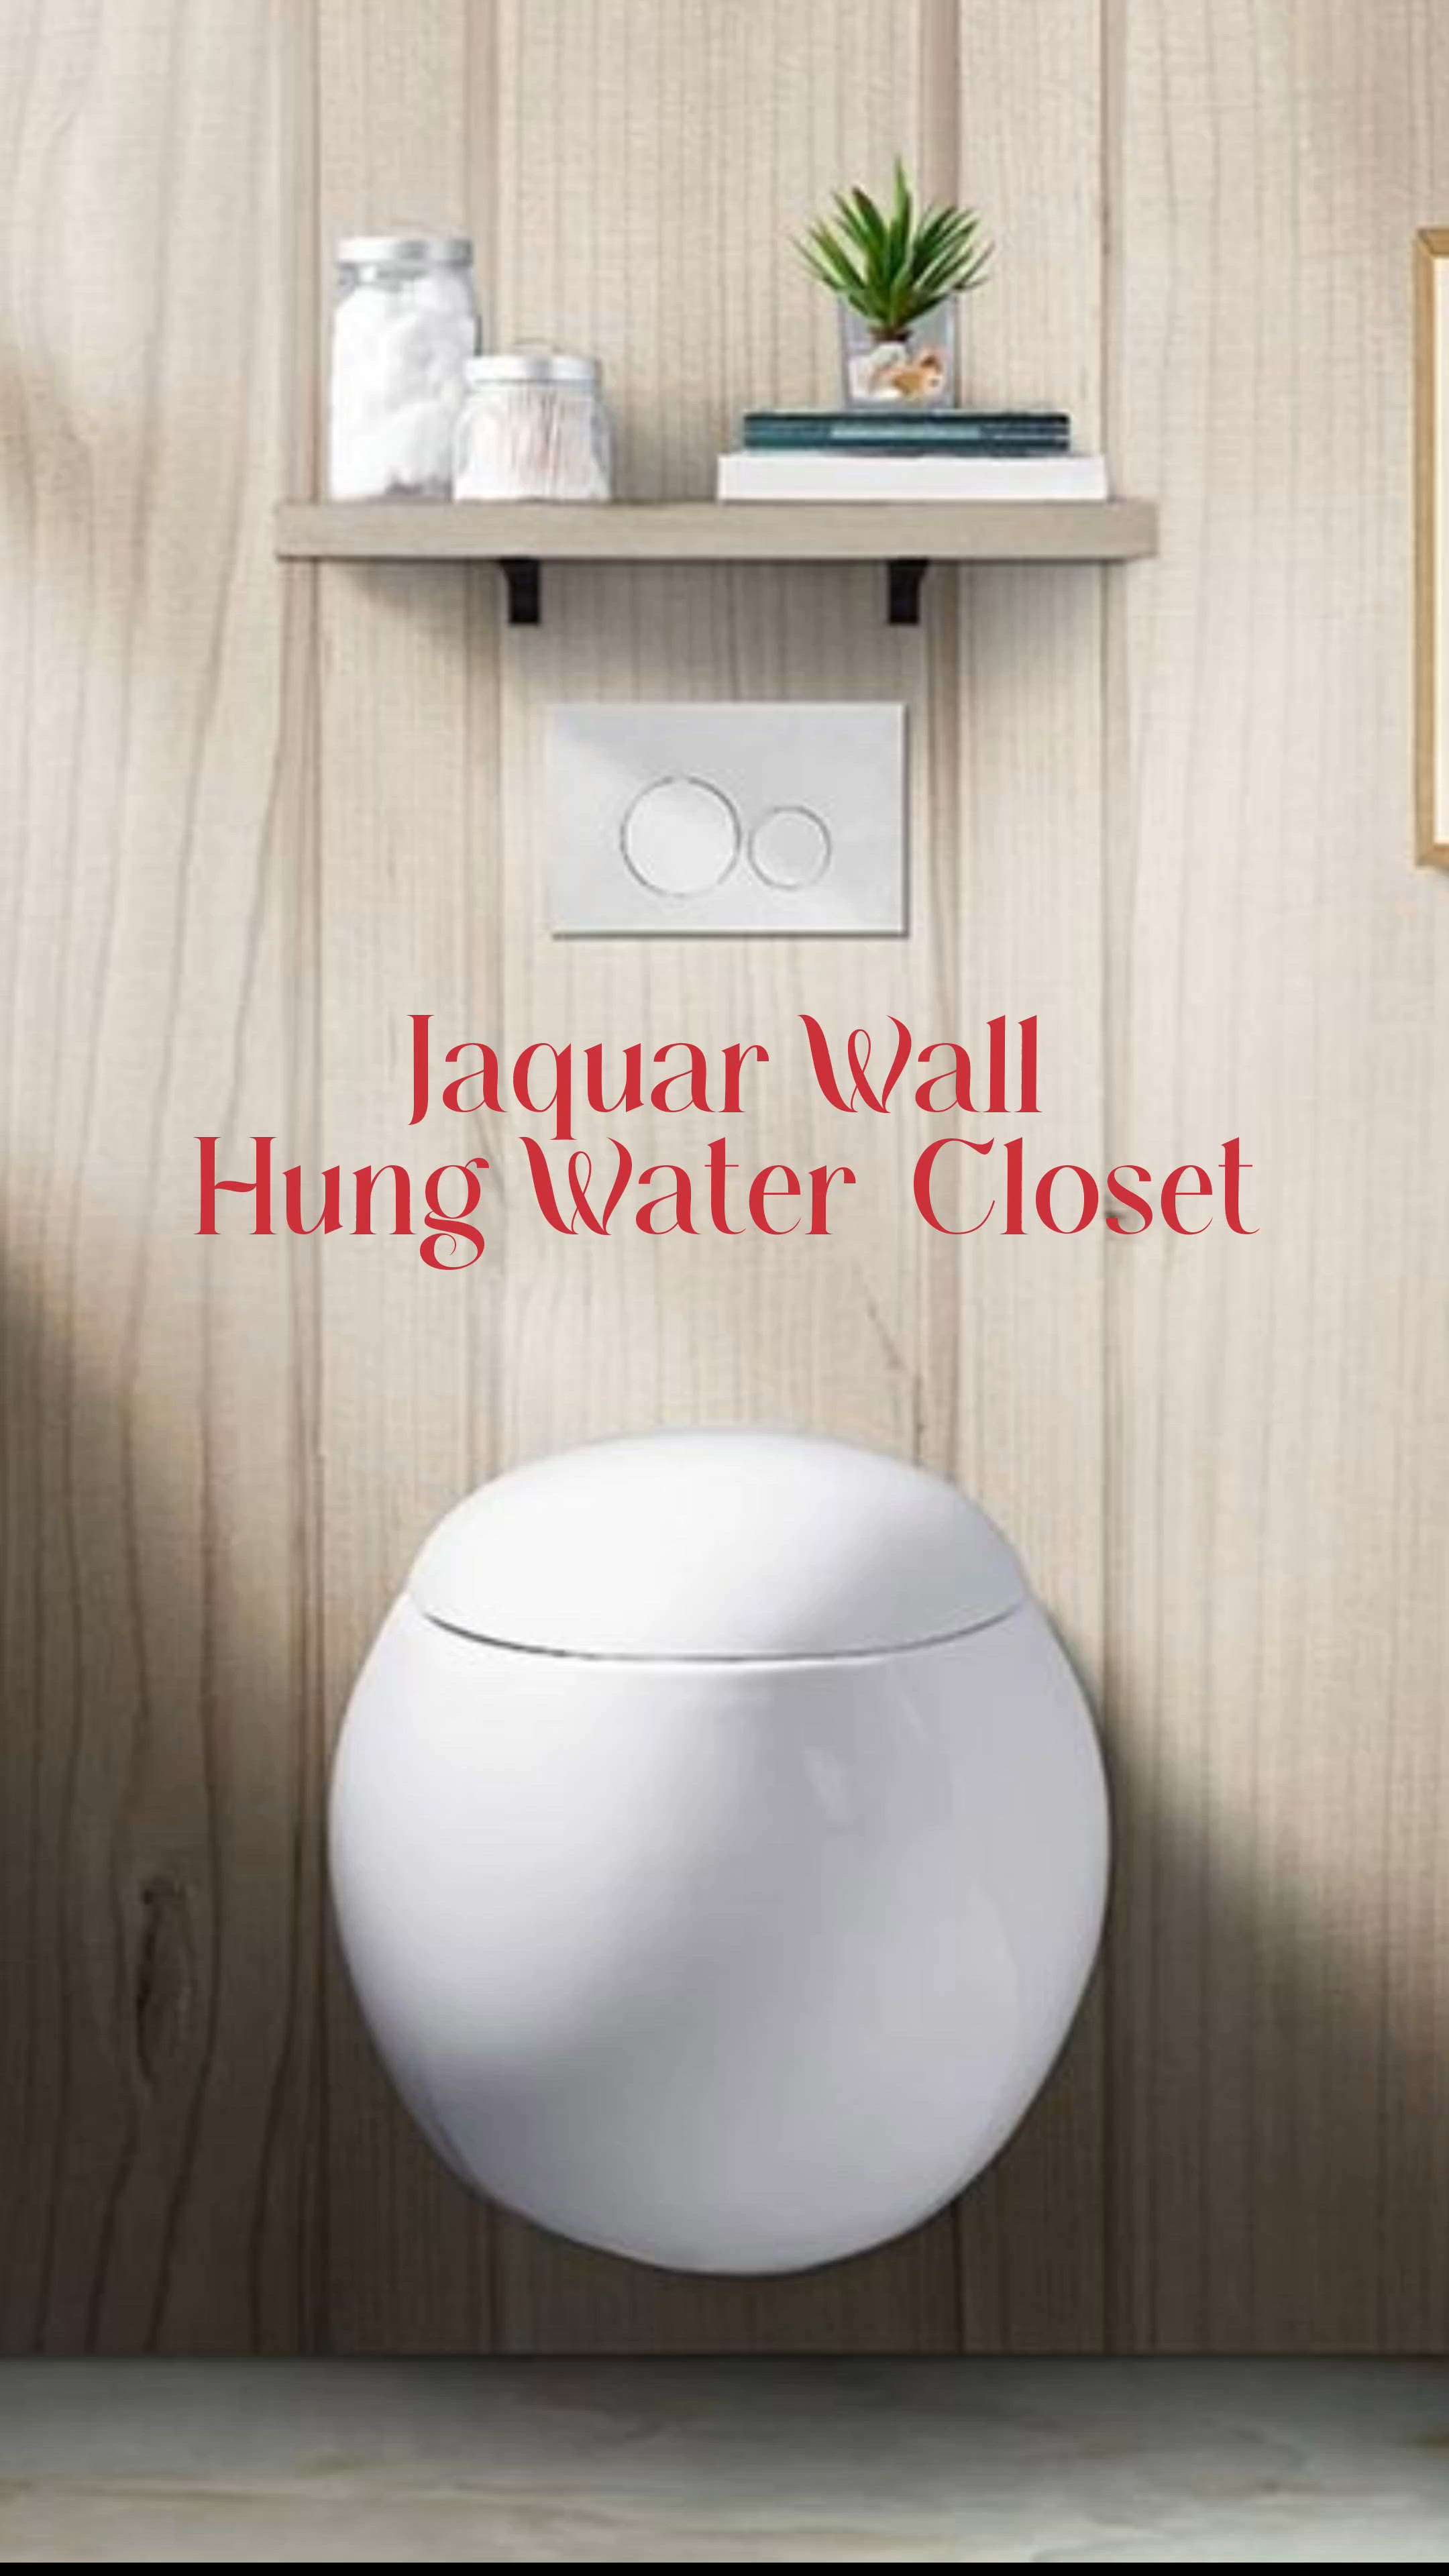 JAQUAR WALL HUNG WC
SERIES: FUSION,
FINISH: GLOSSY,
EGG SHAPED, PP SOFT CLOSE SEAT COVER,HINGES & ACCESSORIES SET, UNIQUE AND ATTRACTIVE LOOK.

 #jaquar #fusionseries #wallhungwc #eggshape #sanitaryshopping #kolo  #bestprice #modernbathroom